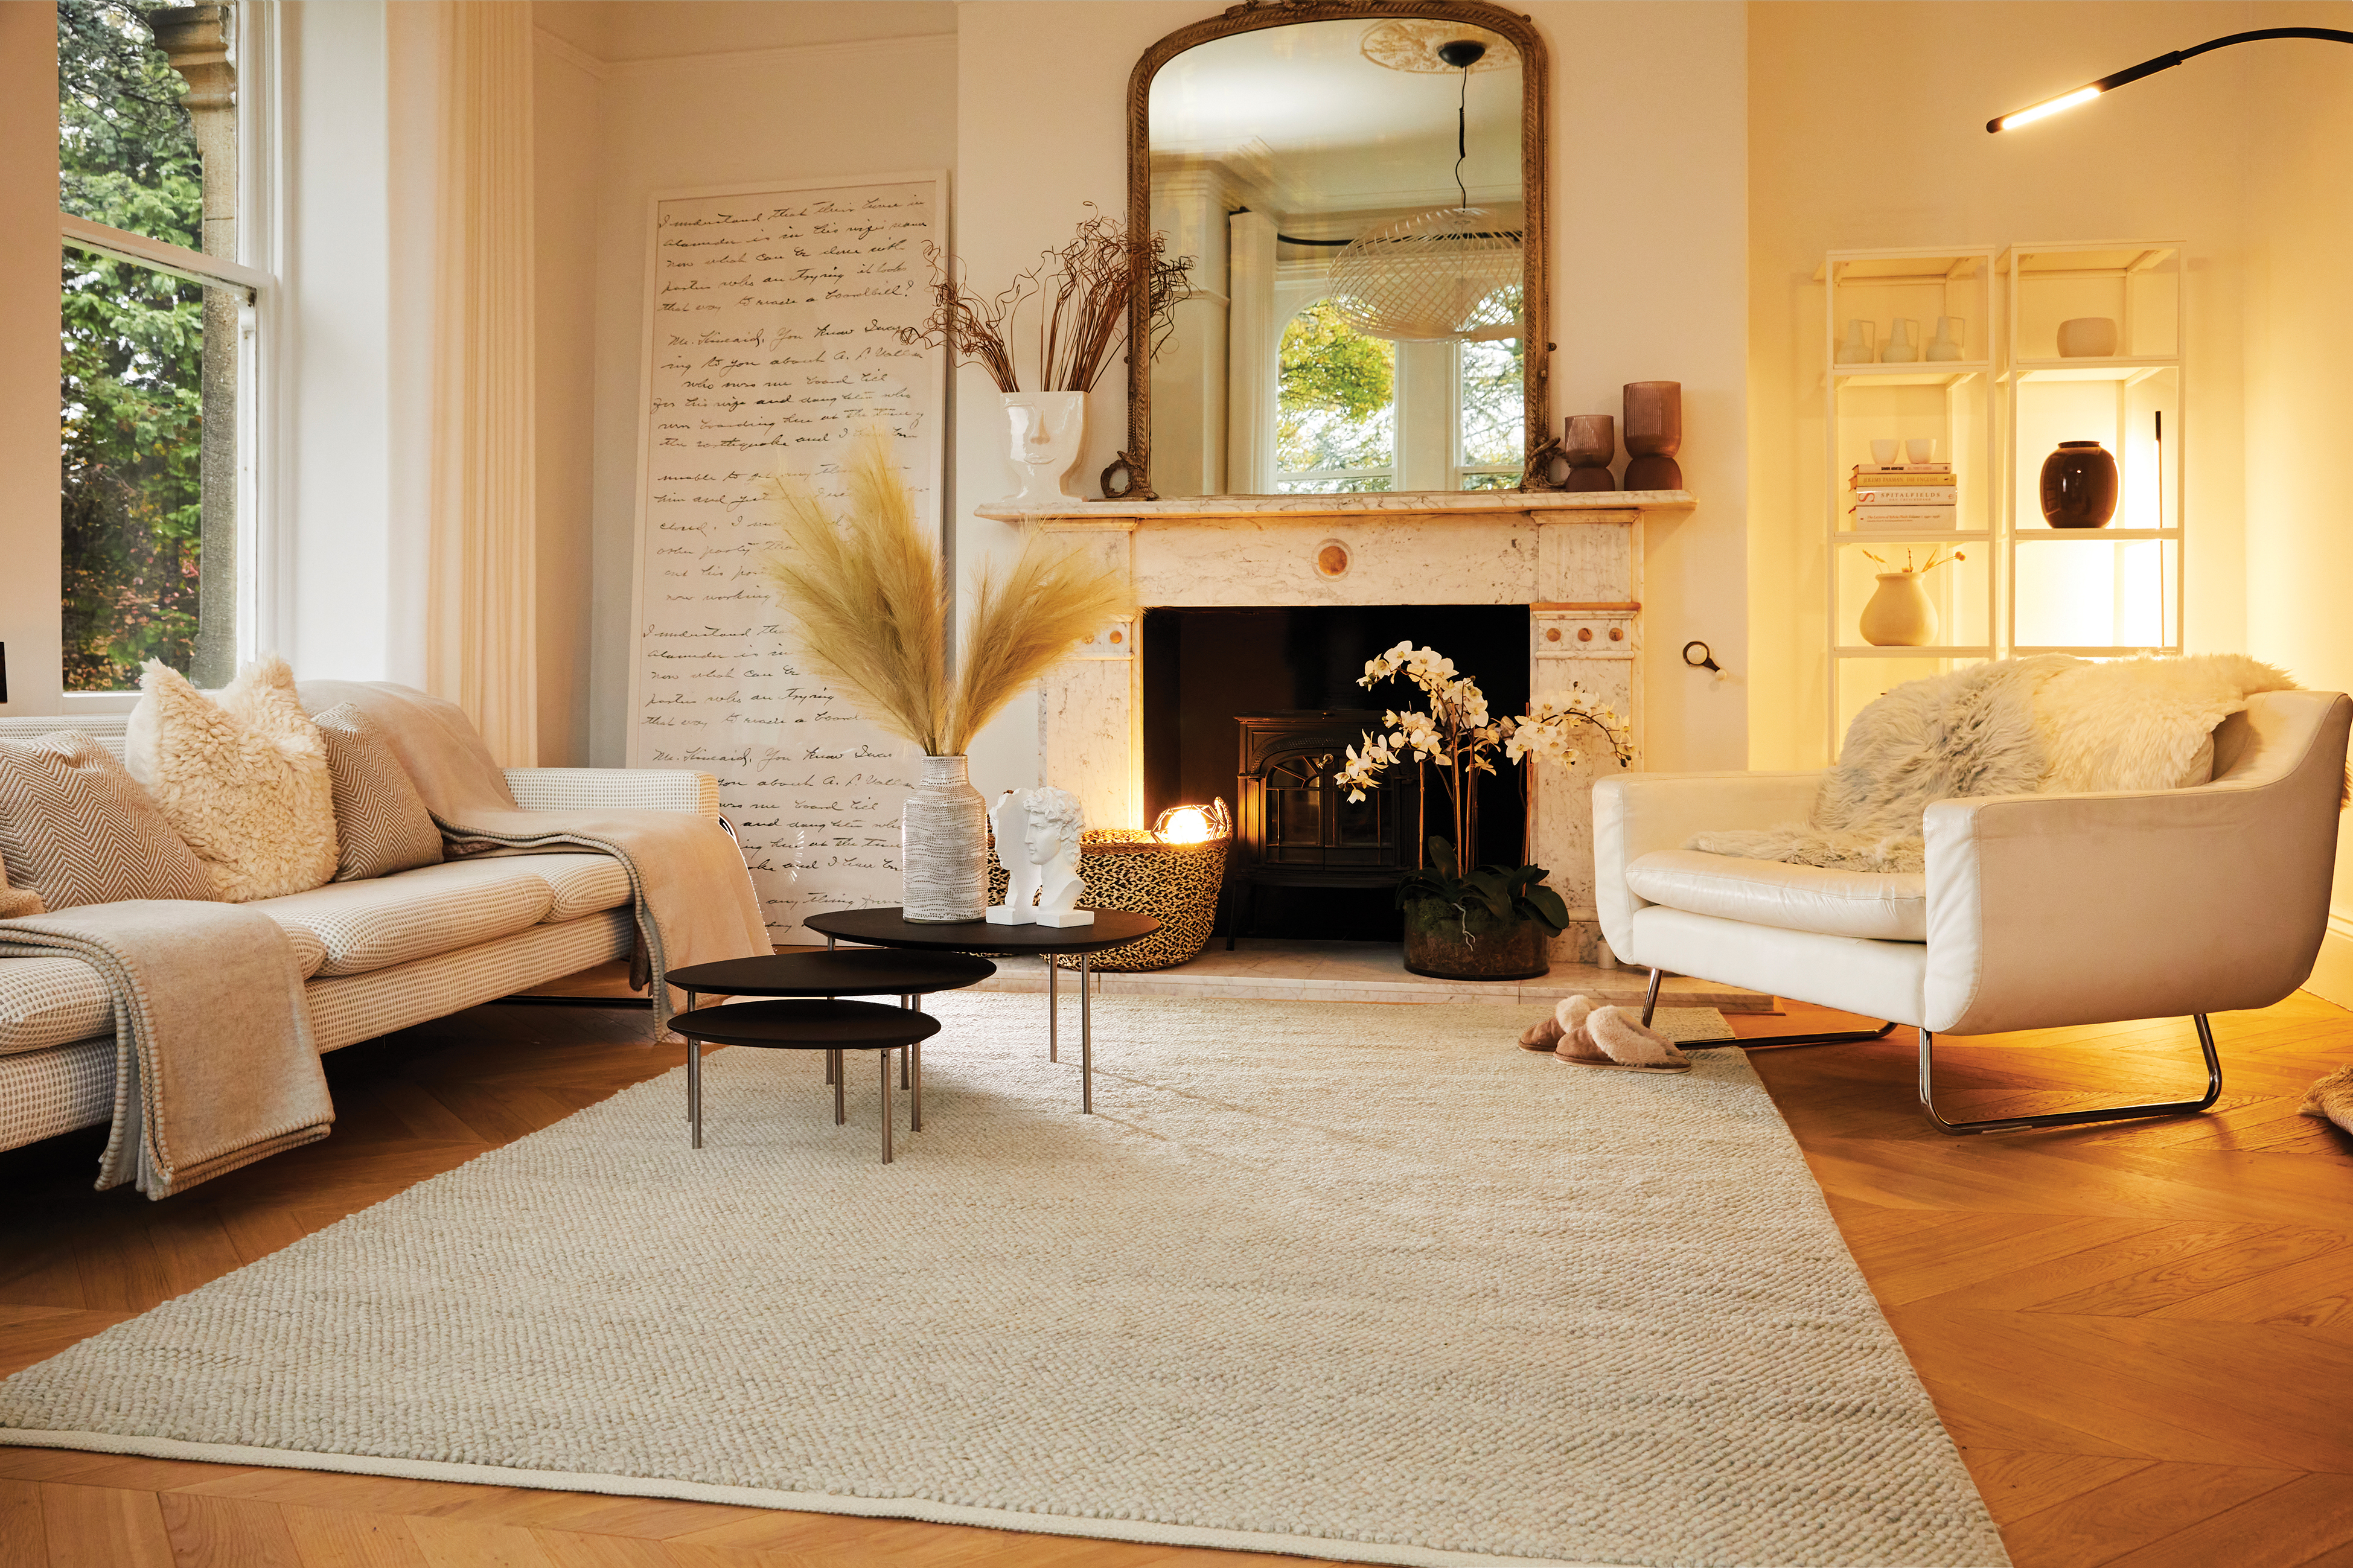 A large living room with a cream area rug on the floor